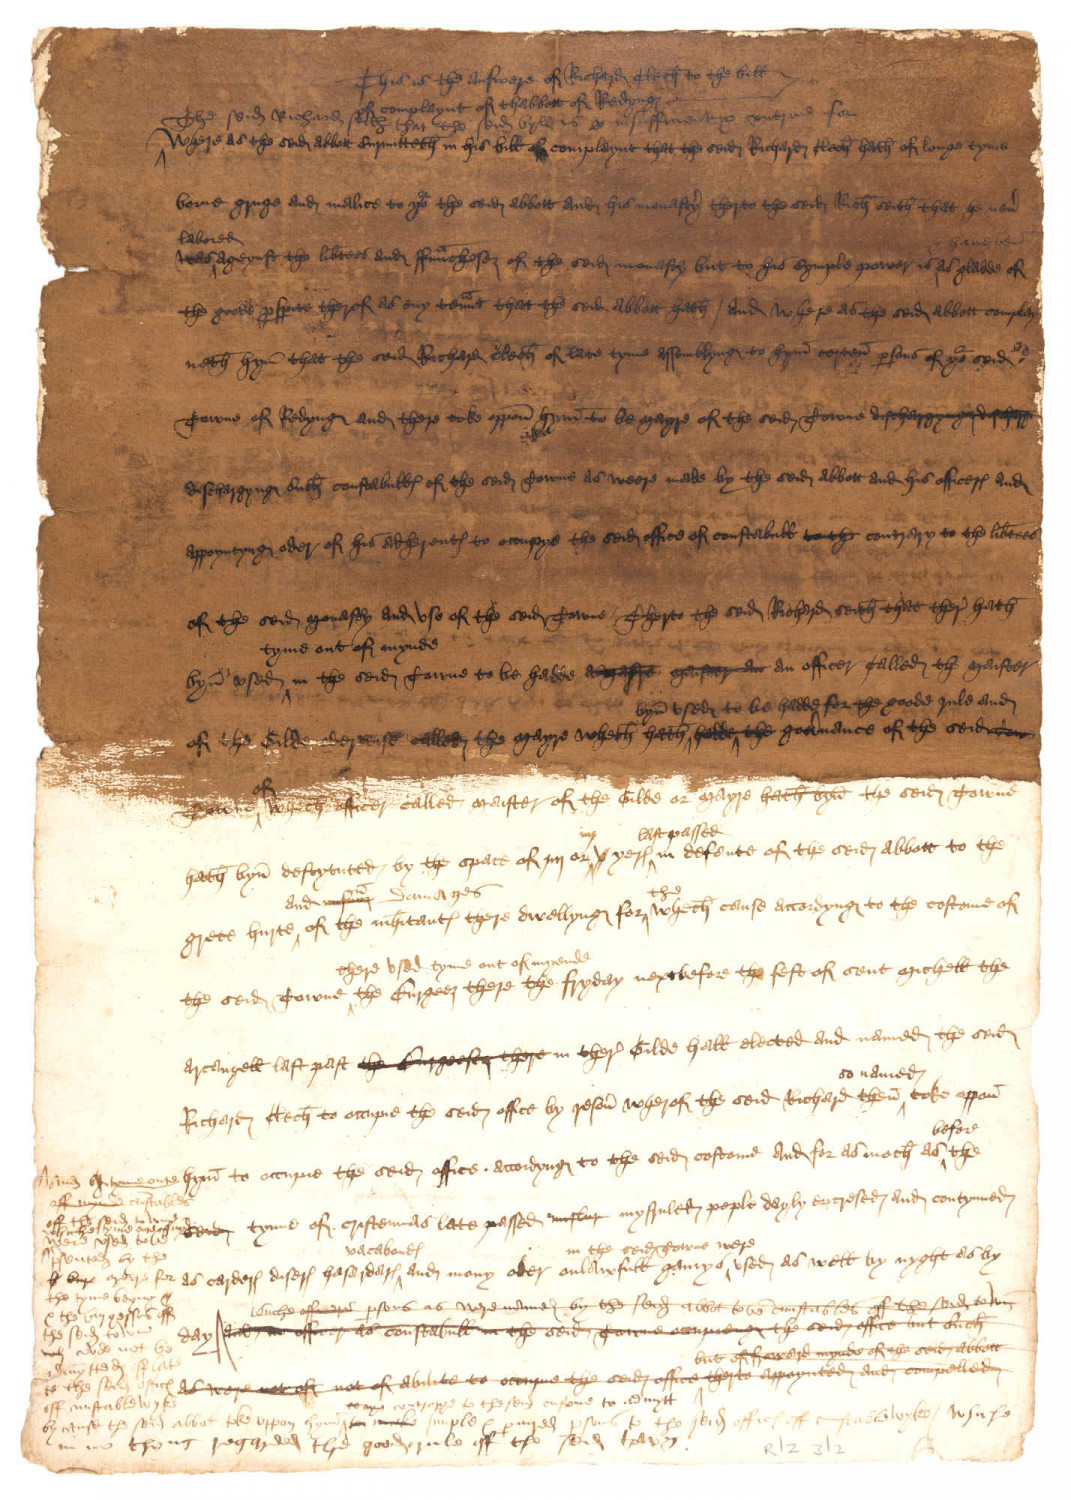 Document with handwritten English from 1498.